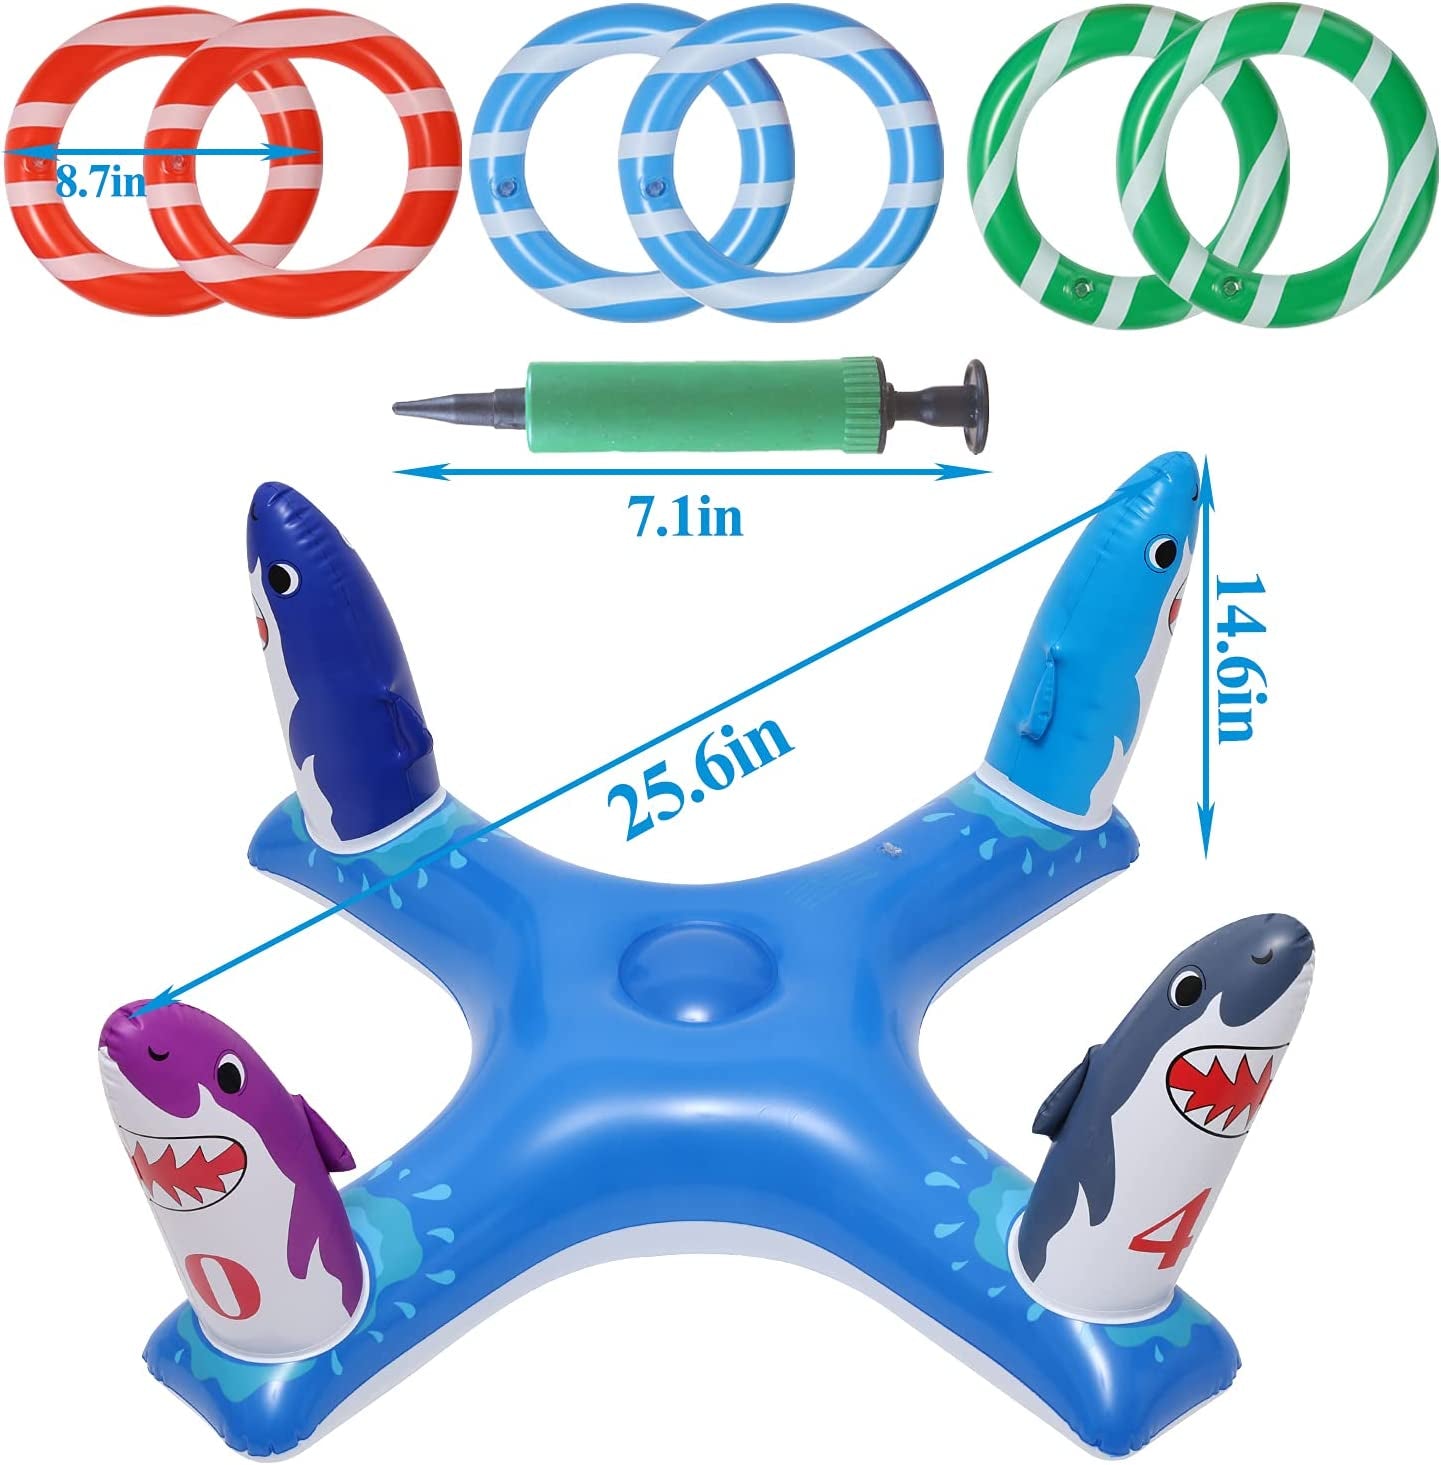 Inflatable Pool Ring Toss, Pool Toys for Kids with 6pcs Rings, Swimming Pool Games for Adults and Family